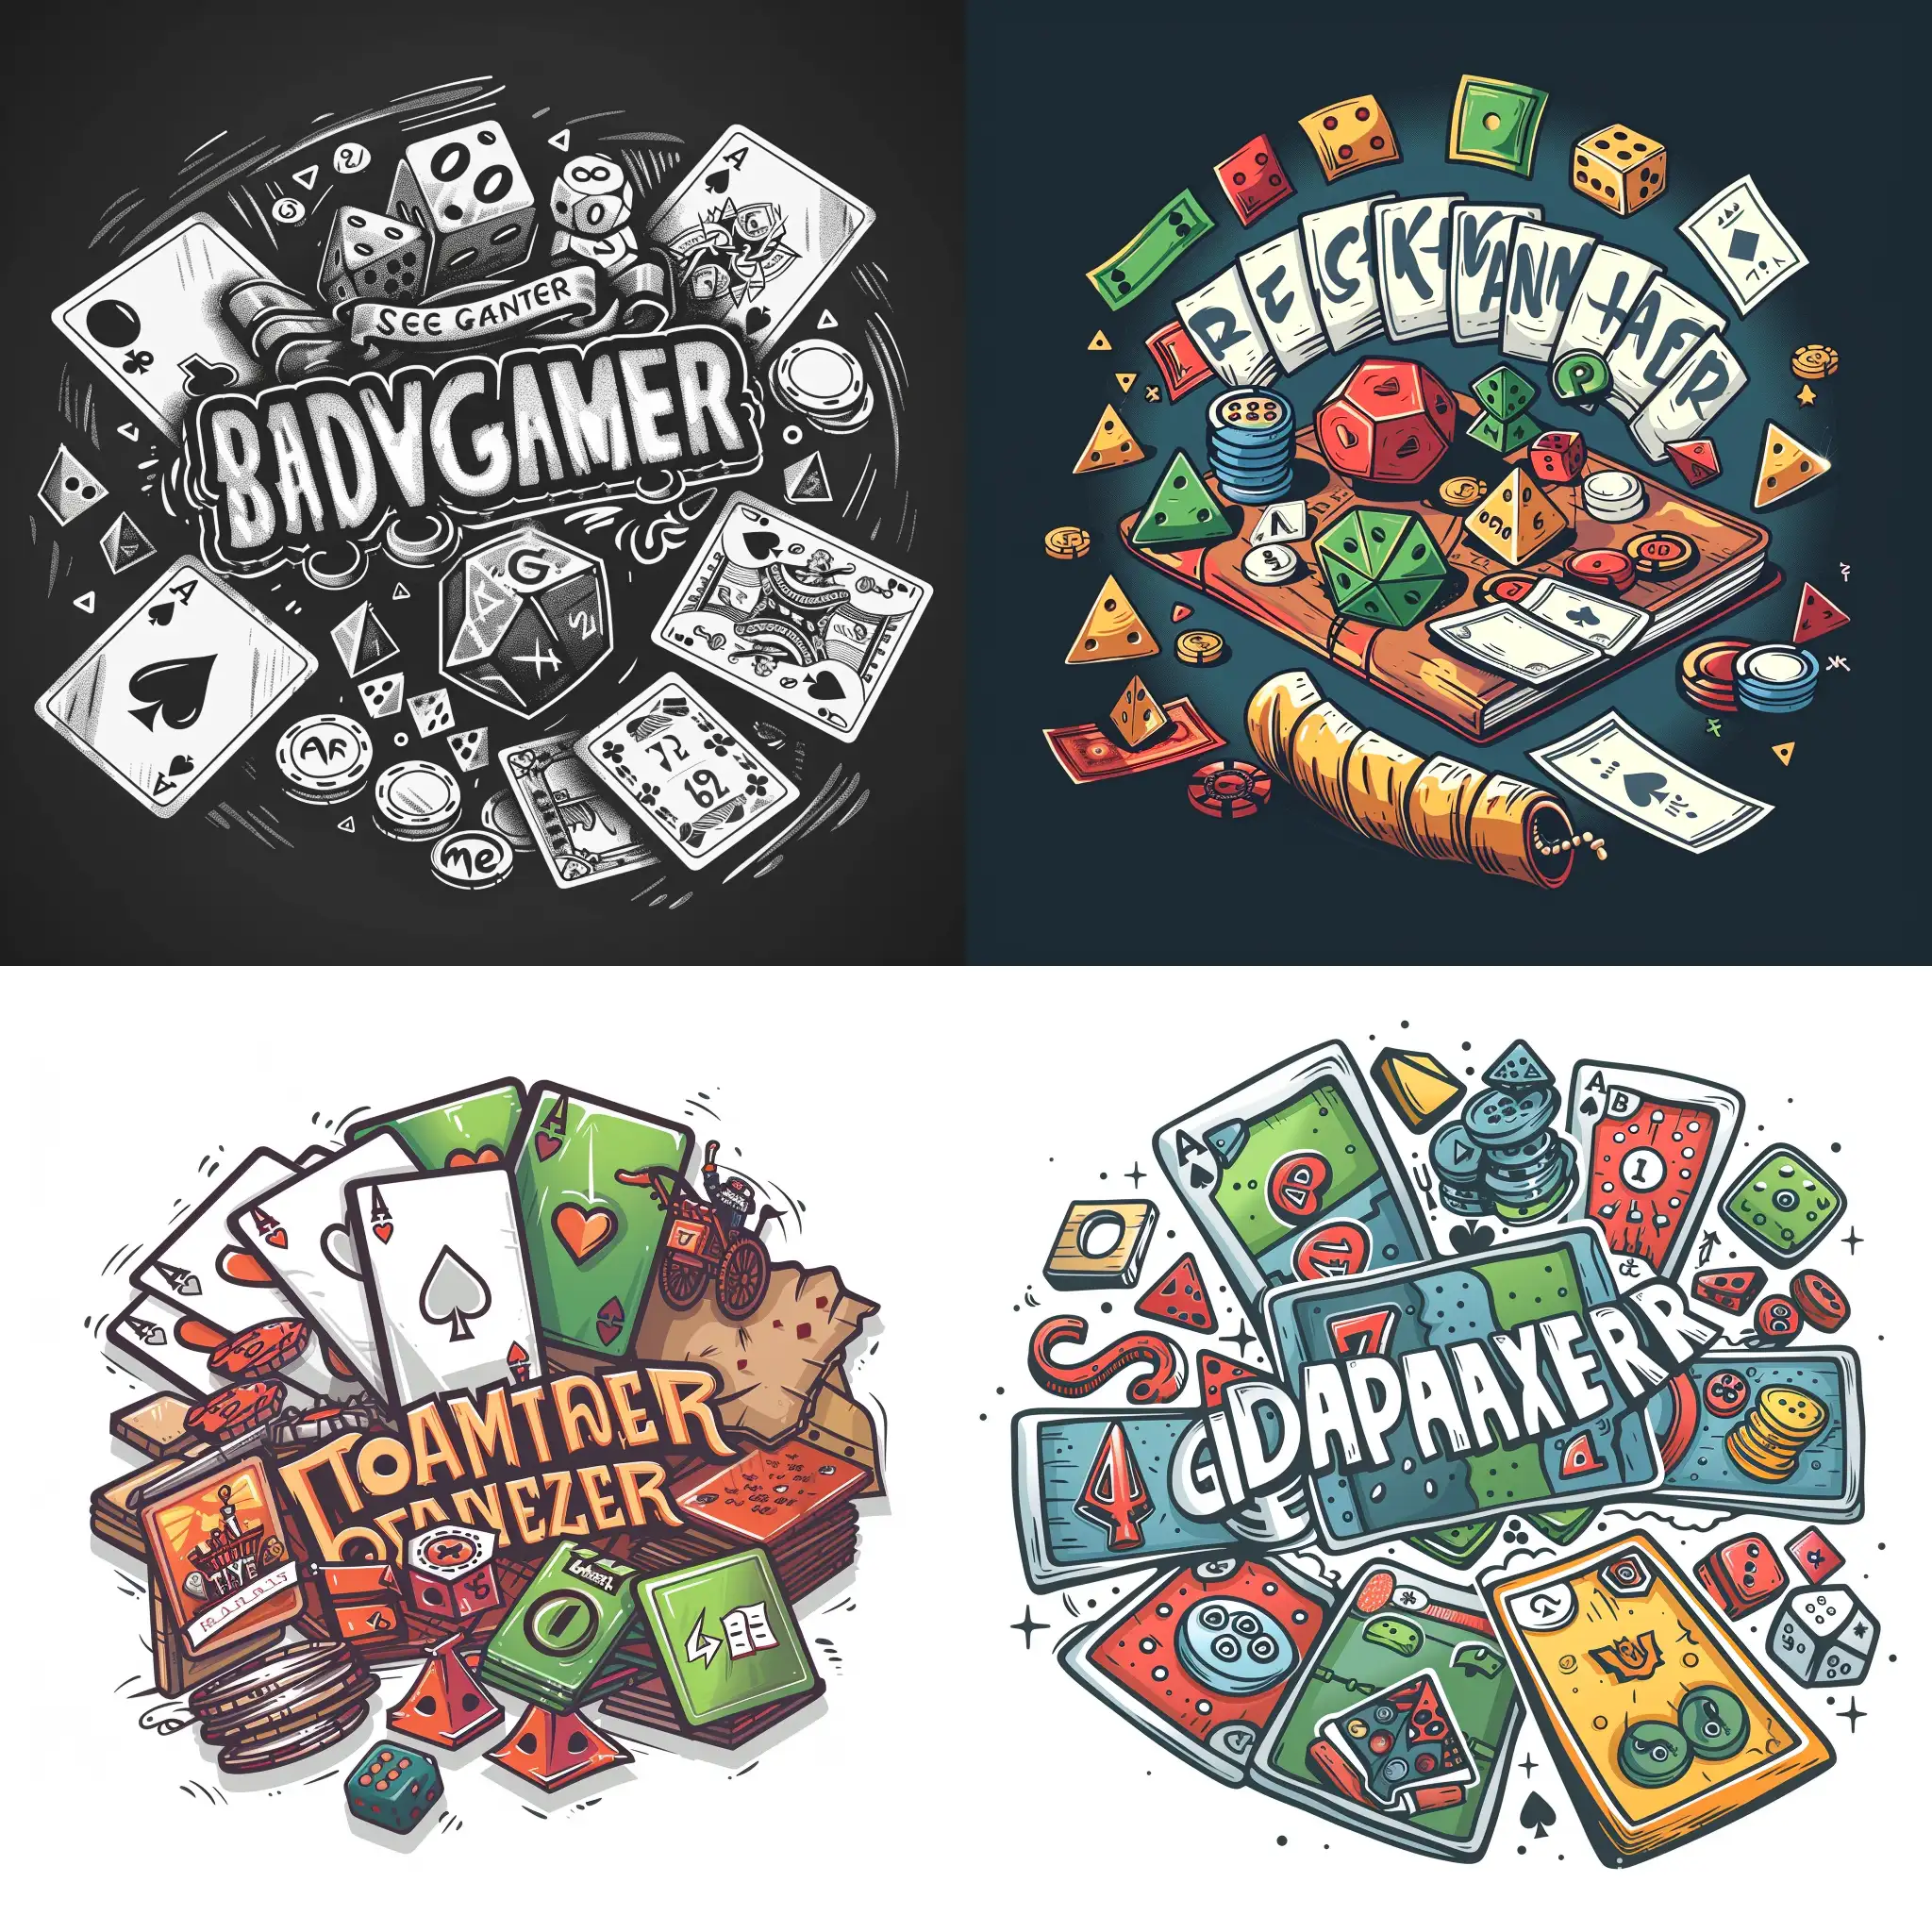 Board-Game-Elements-Logo-Design-with-Dice-Cards-and-Miniatures